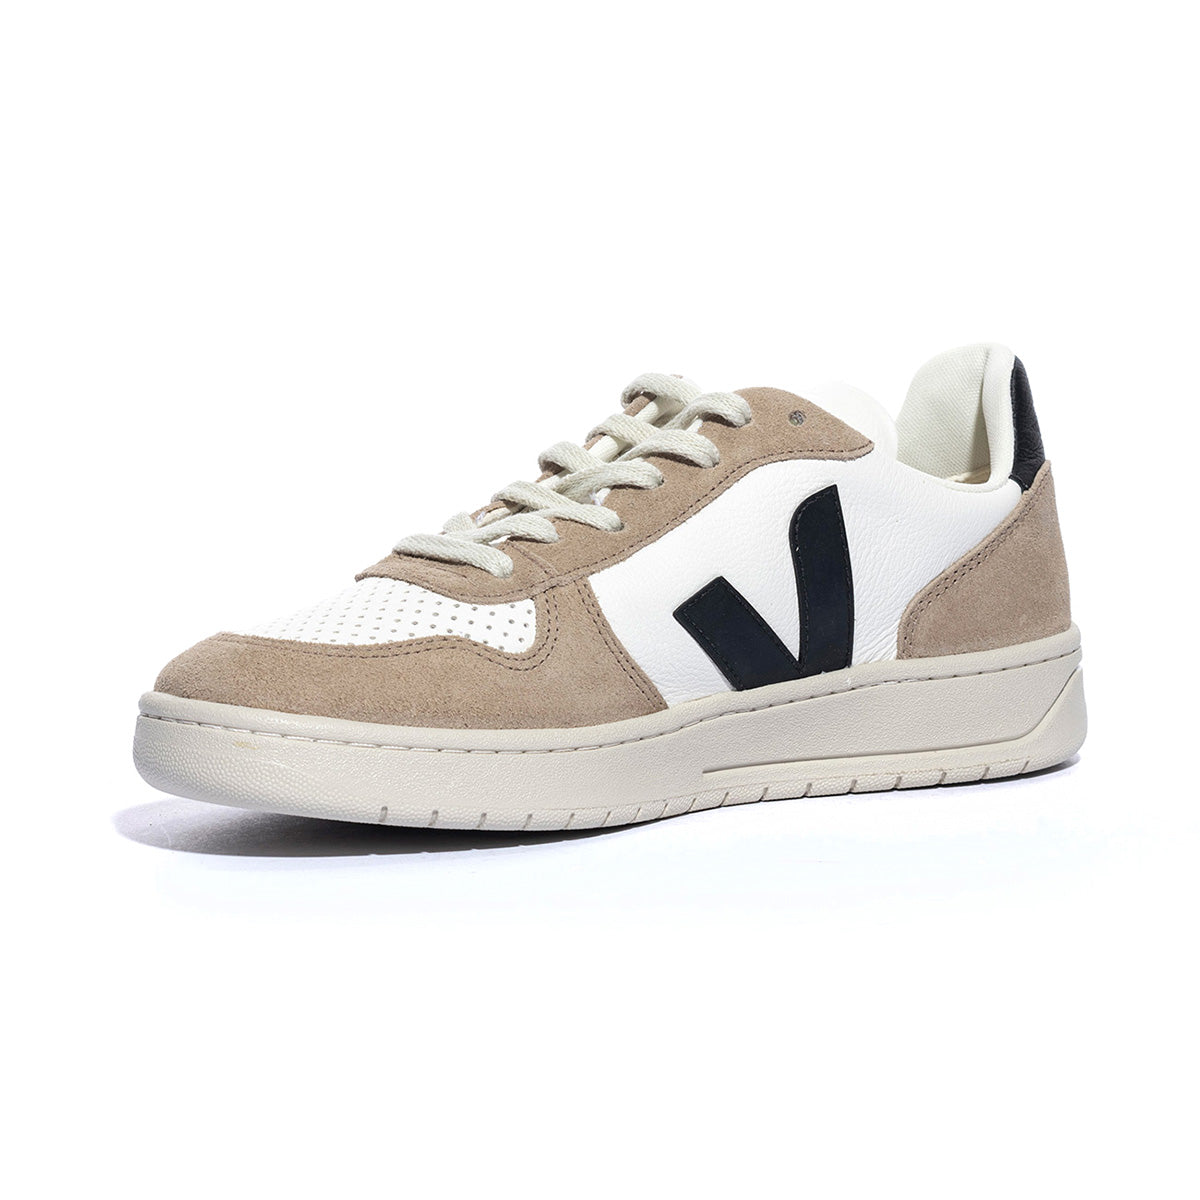 Sneakers Veja Chroefree Leather Bianche Beige